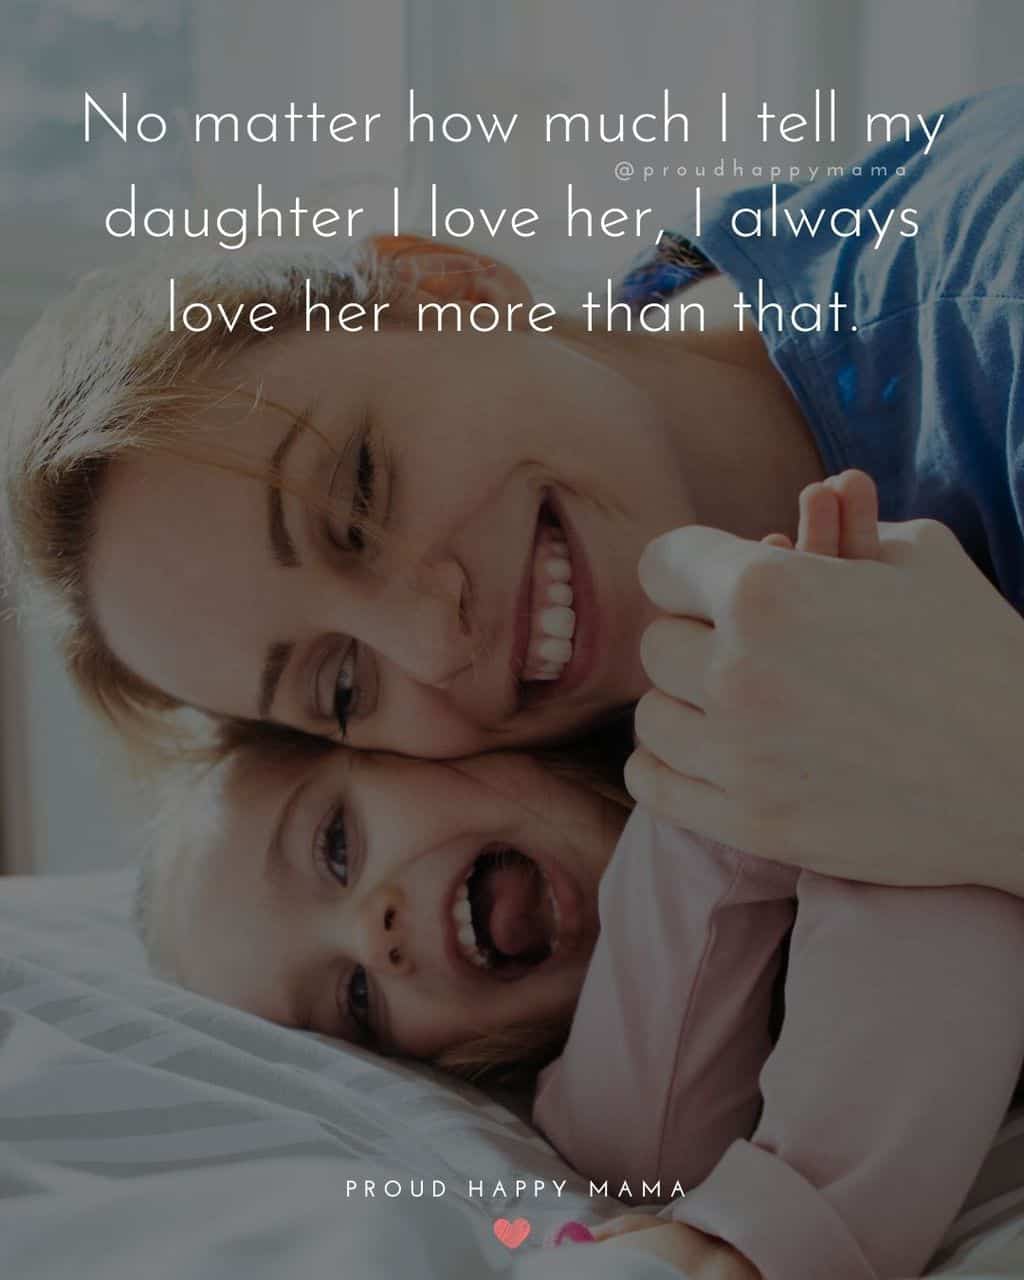 happy daughter quotes - ‘No matter how much I tell my daughter I love her, I always love her more than that.’